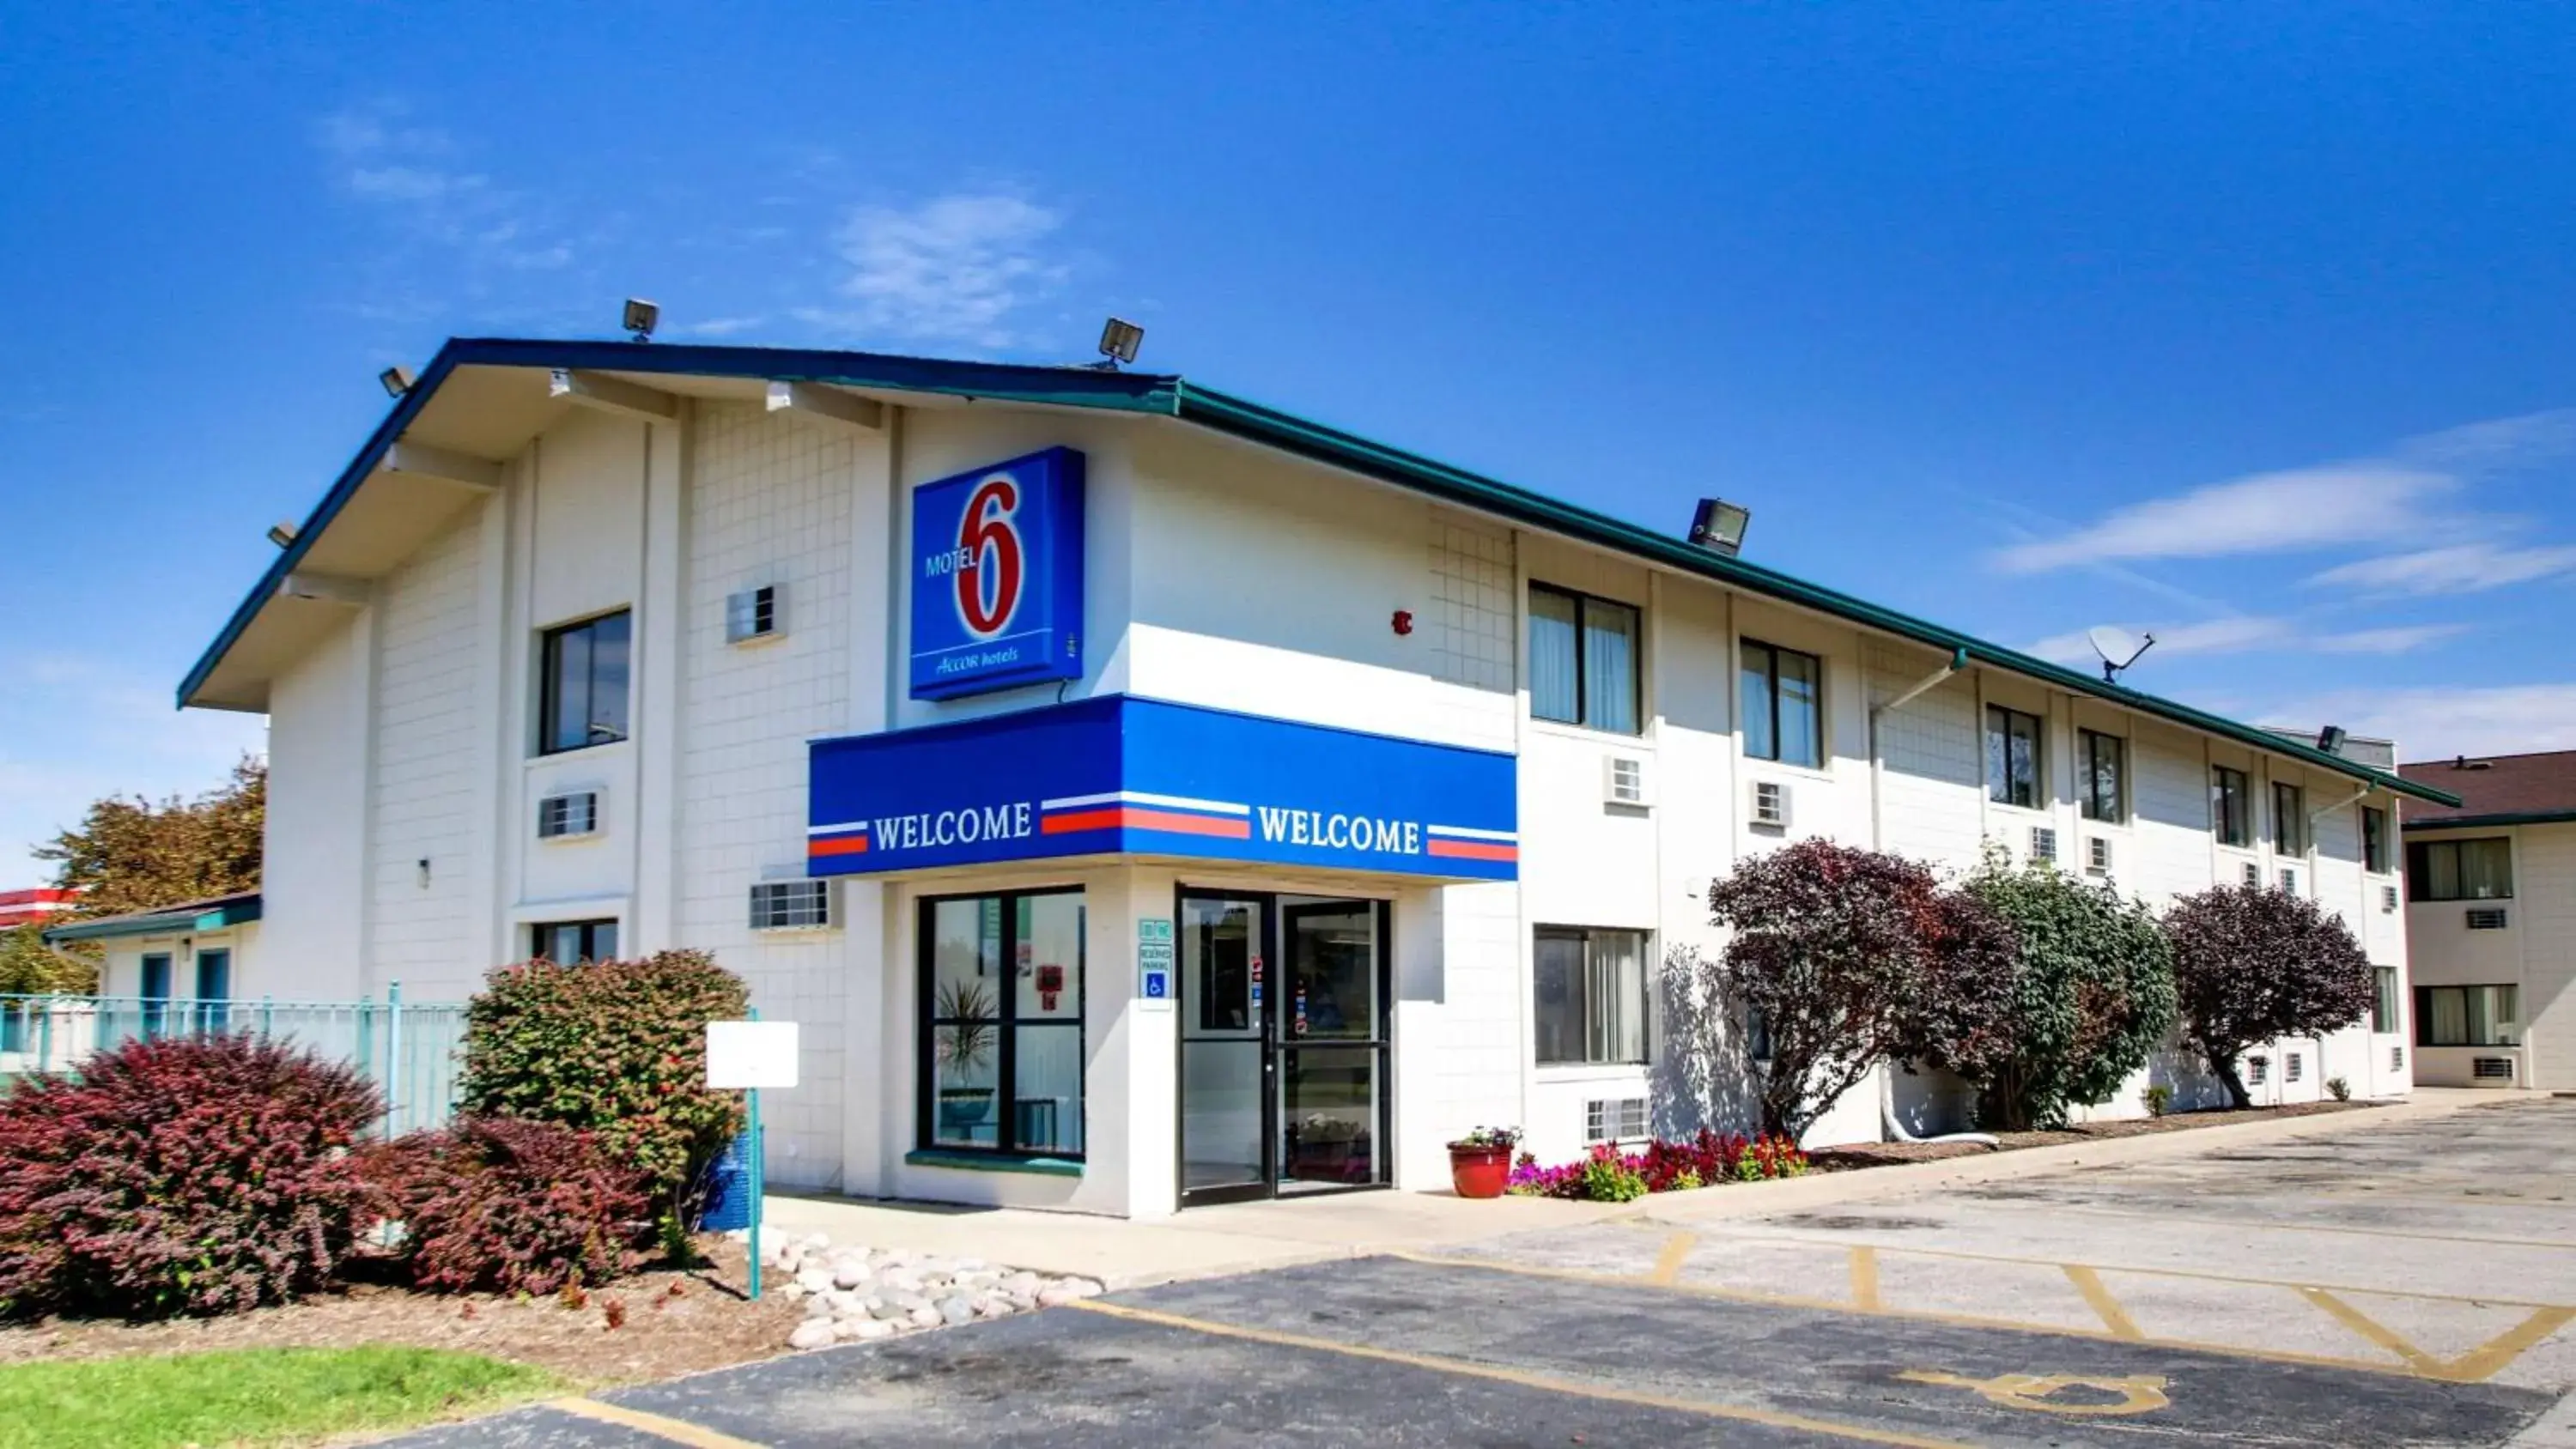 Property building in Motel 6-Normal, IL - Bloomington Area